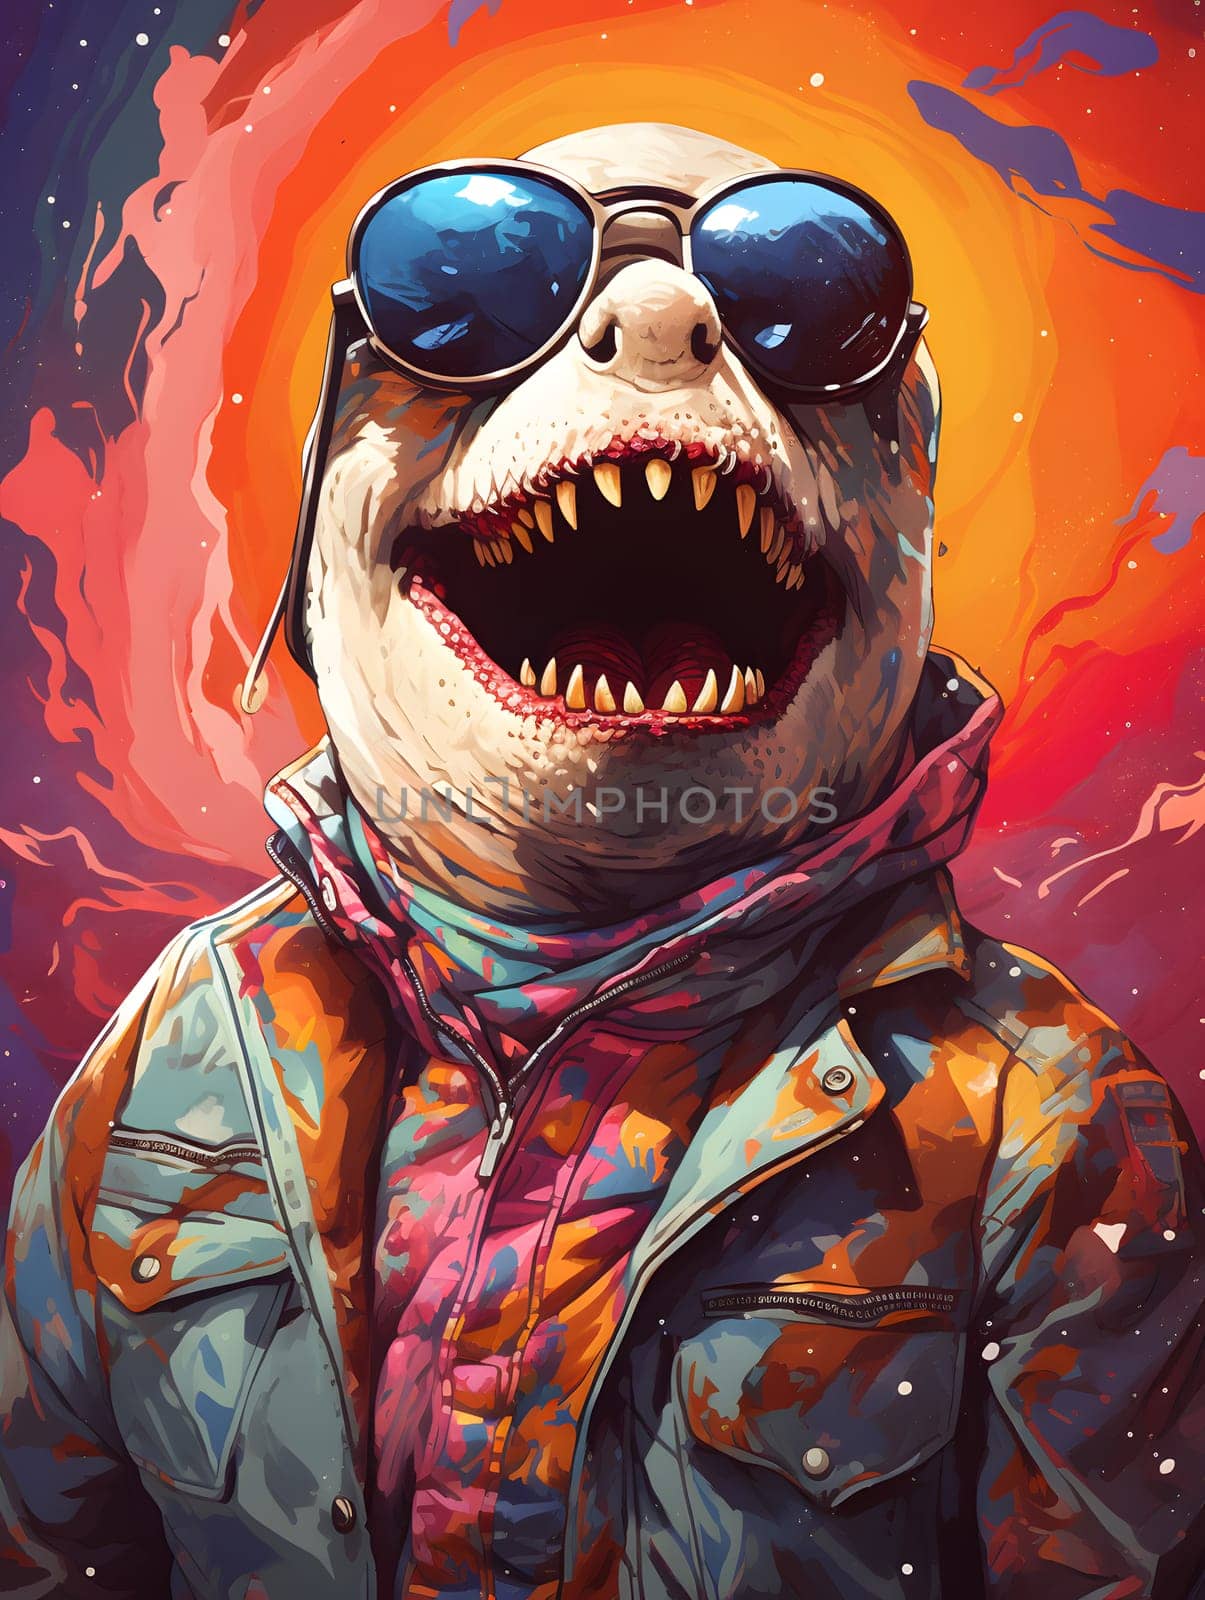 Funky Bear: The Cool Sunglasses and Jacket Ensemble by Nadtochiy